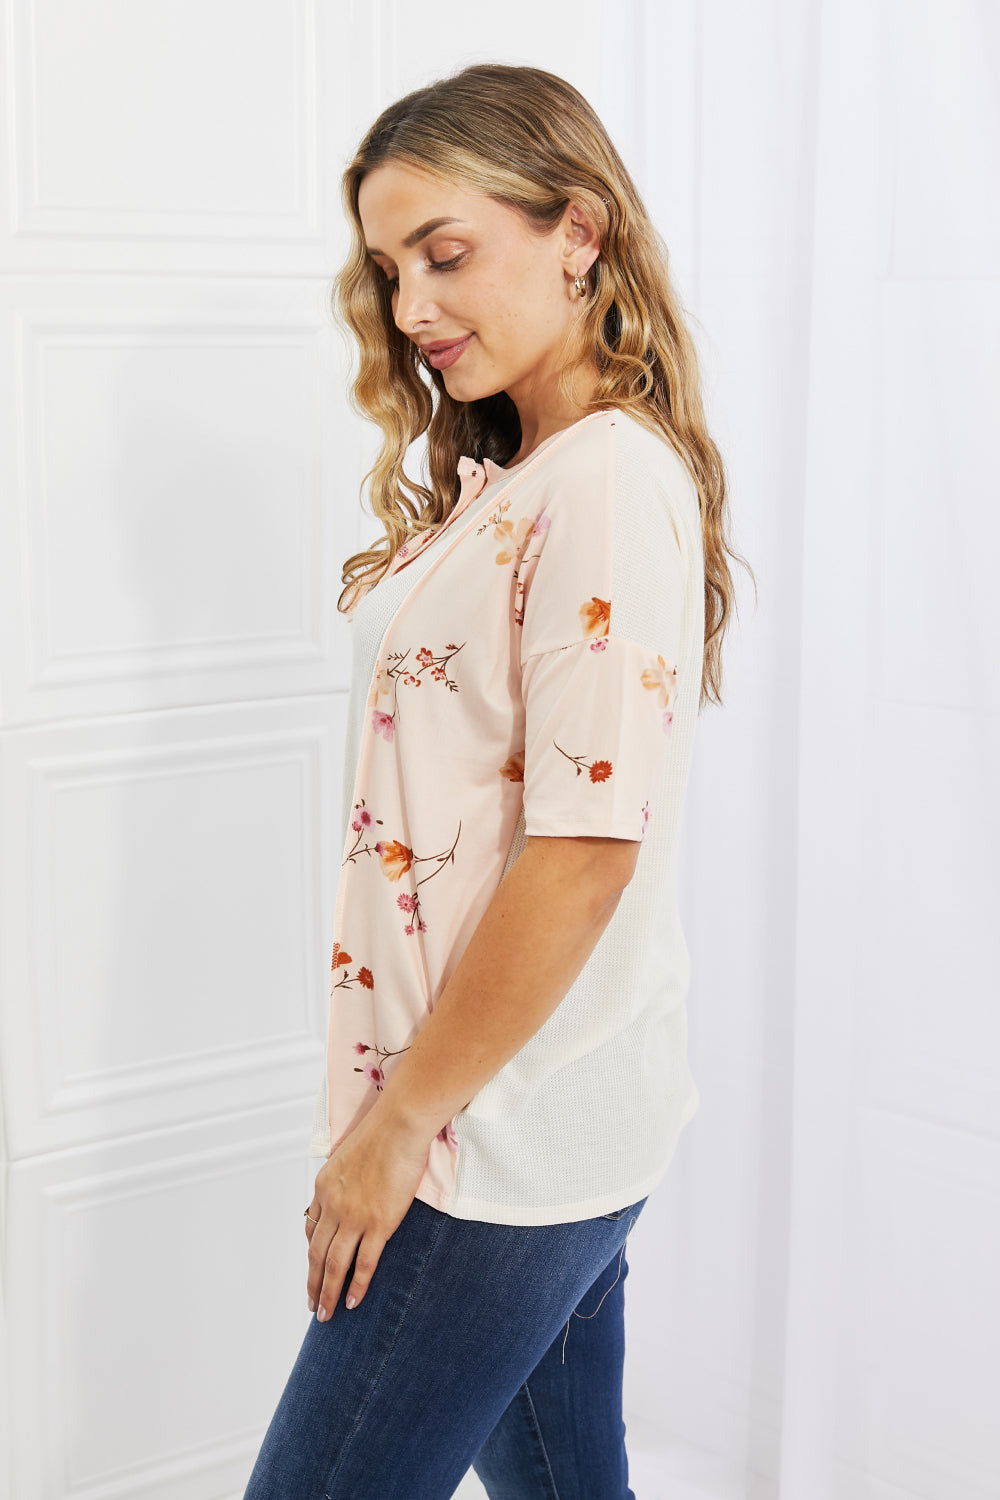 BOMBOM She's Blossoming Floral Contrast Knit Top in Blush